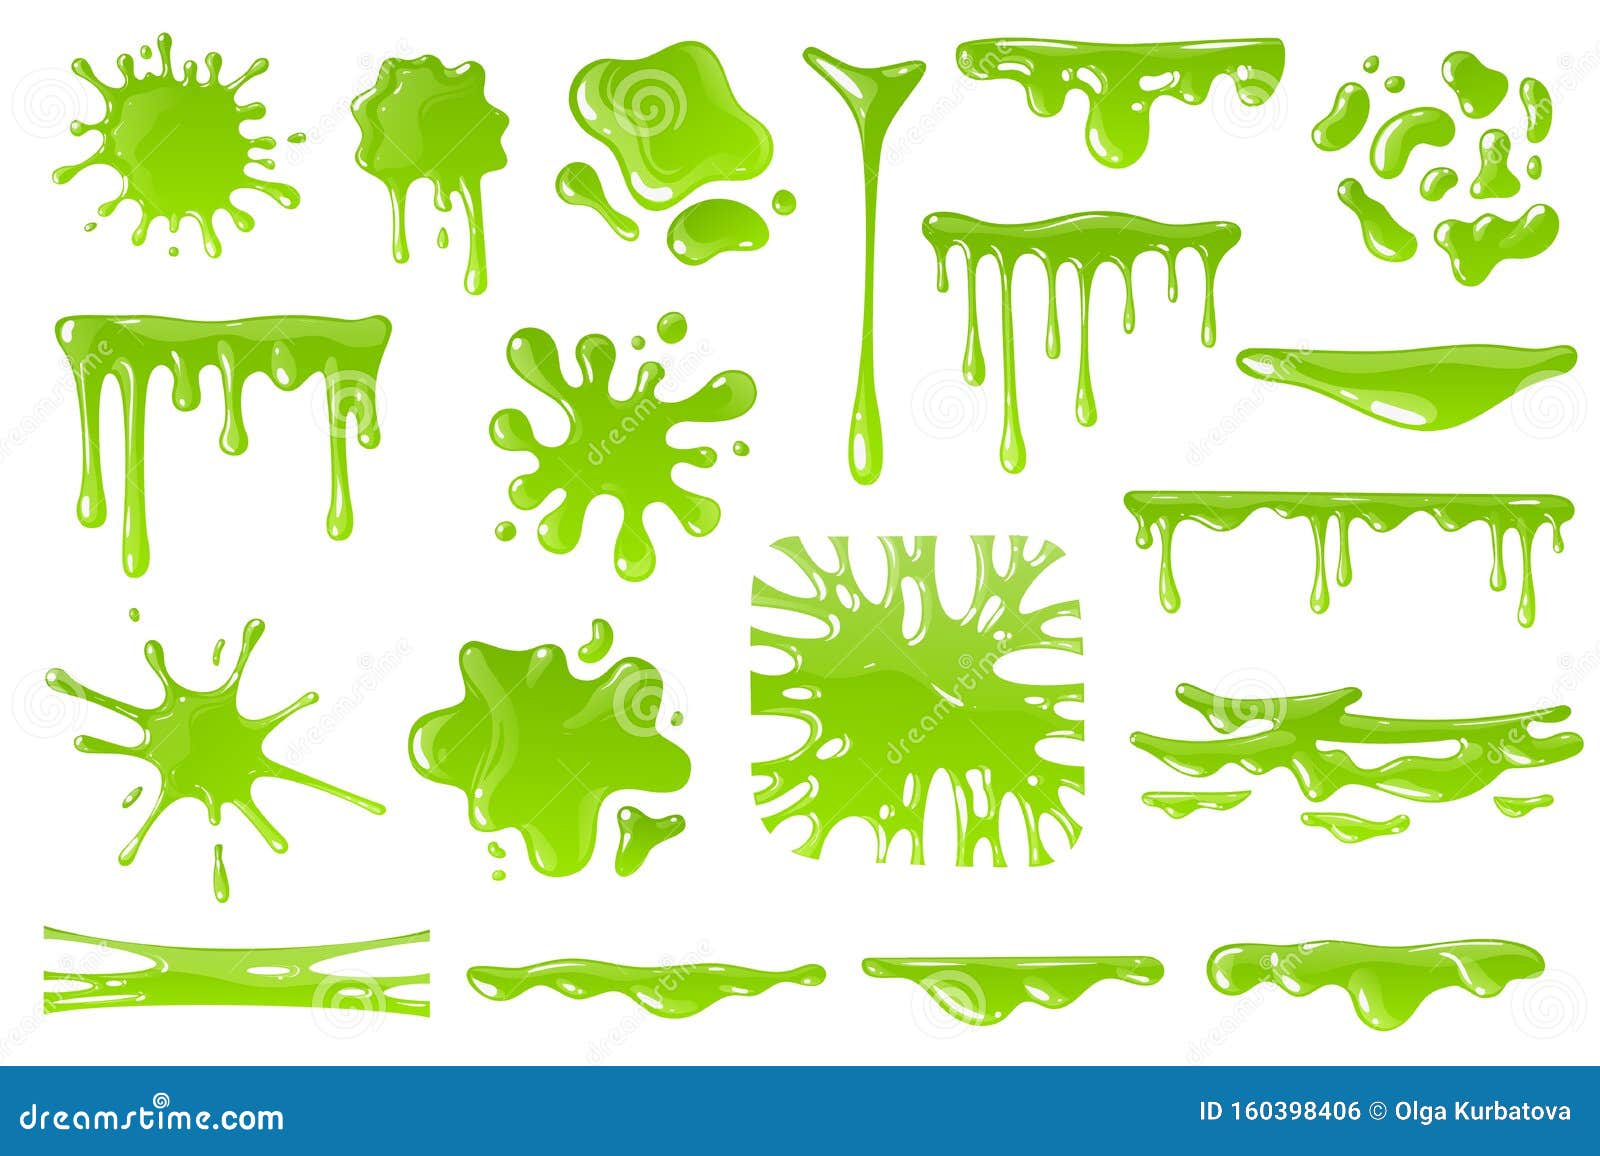 green cartoon slime. goo blob splashes, sticky dripping mucus. slimy drops, messy borders for halloween banners 